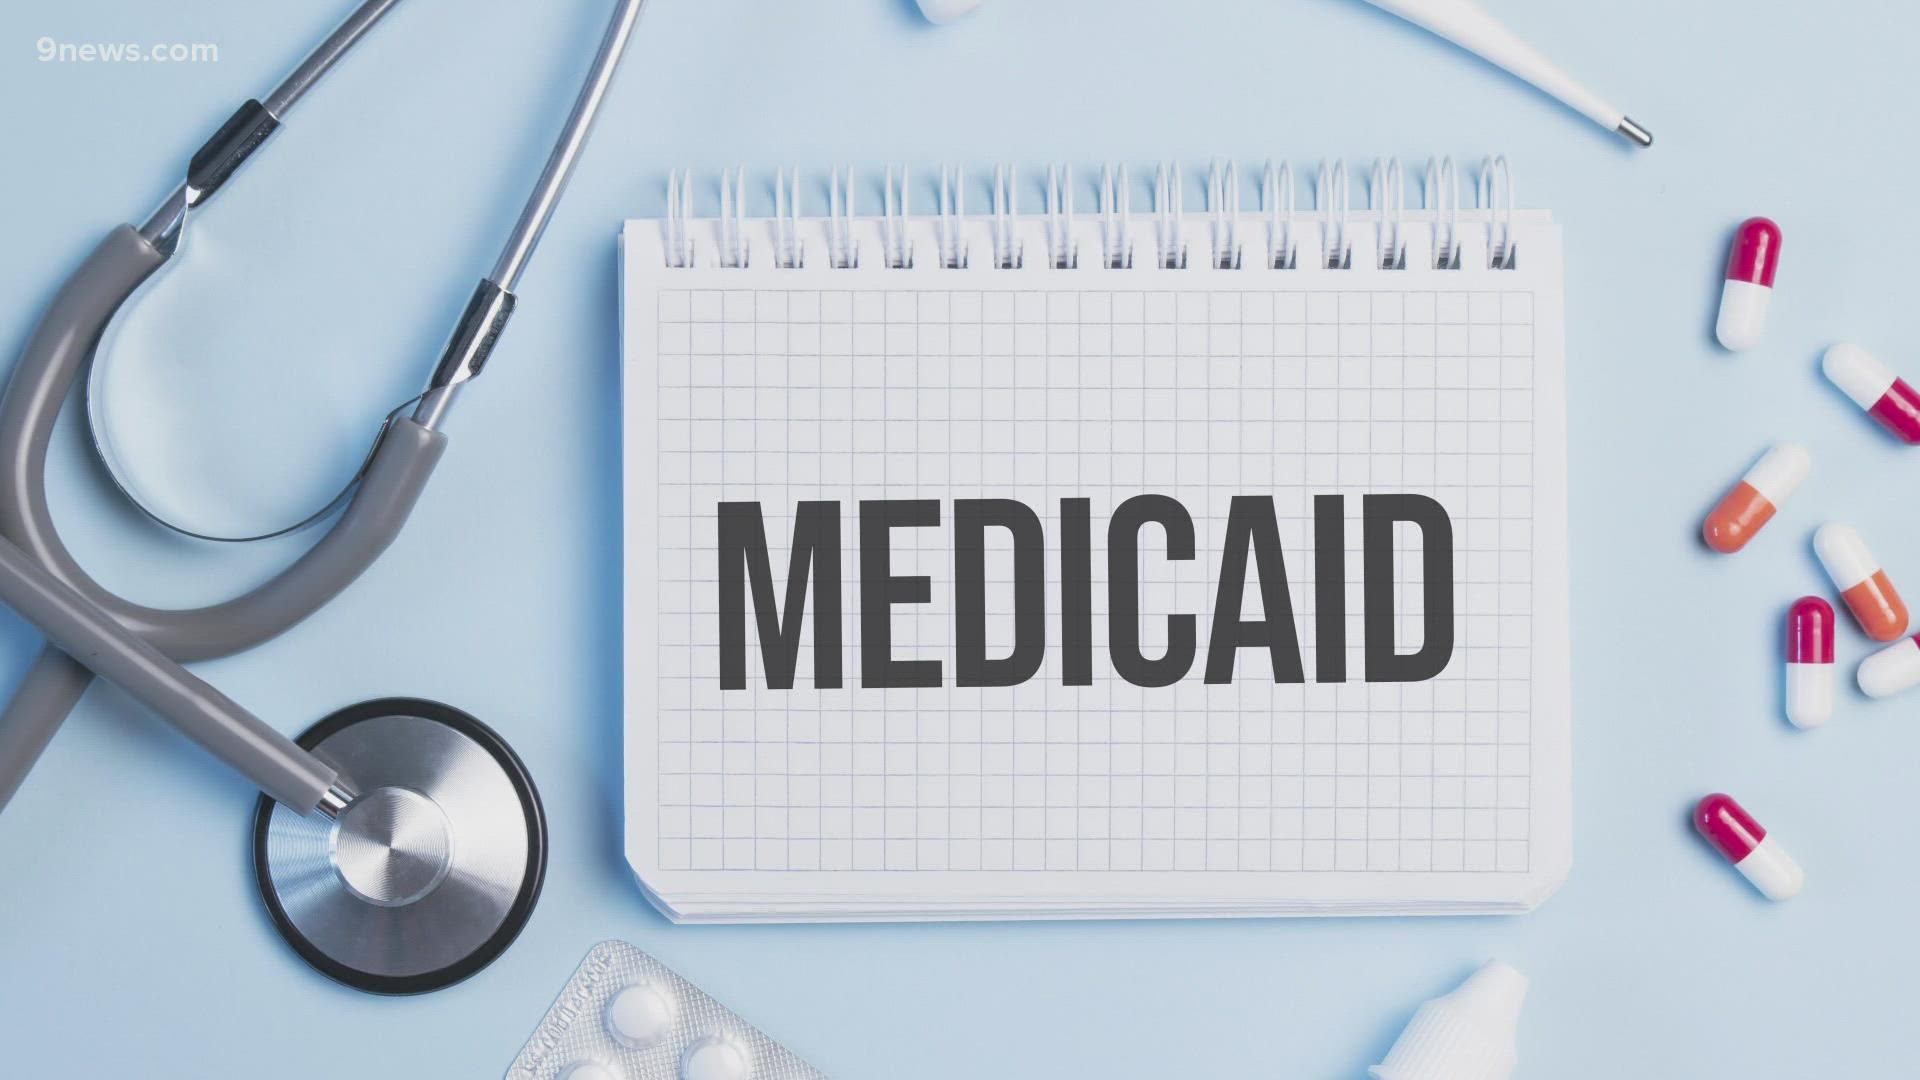 A state Medicaid group wants money back from some providers in Colorado because of a form error. Providers say this could discourage treatment of Medicaid patients.